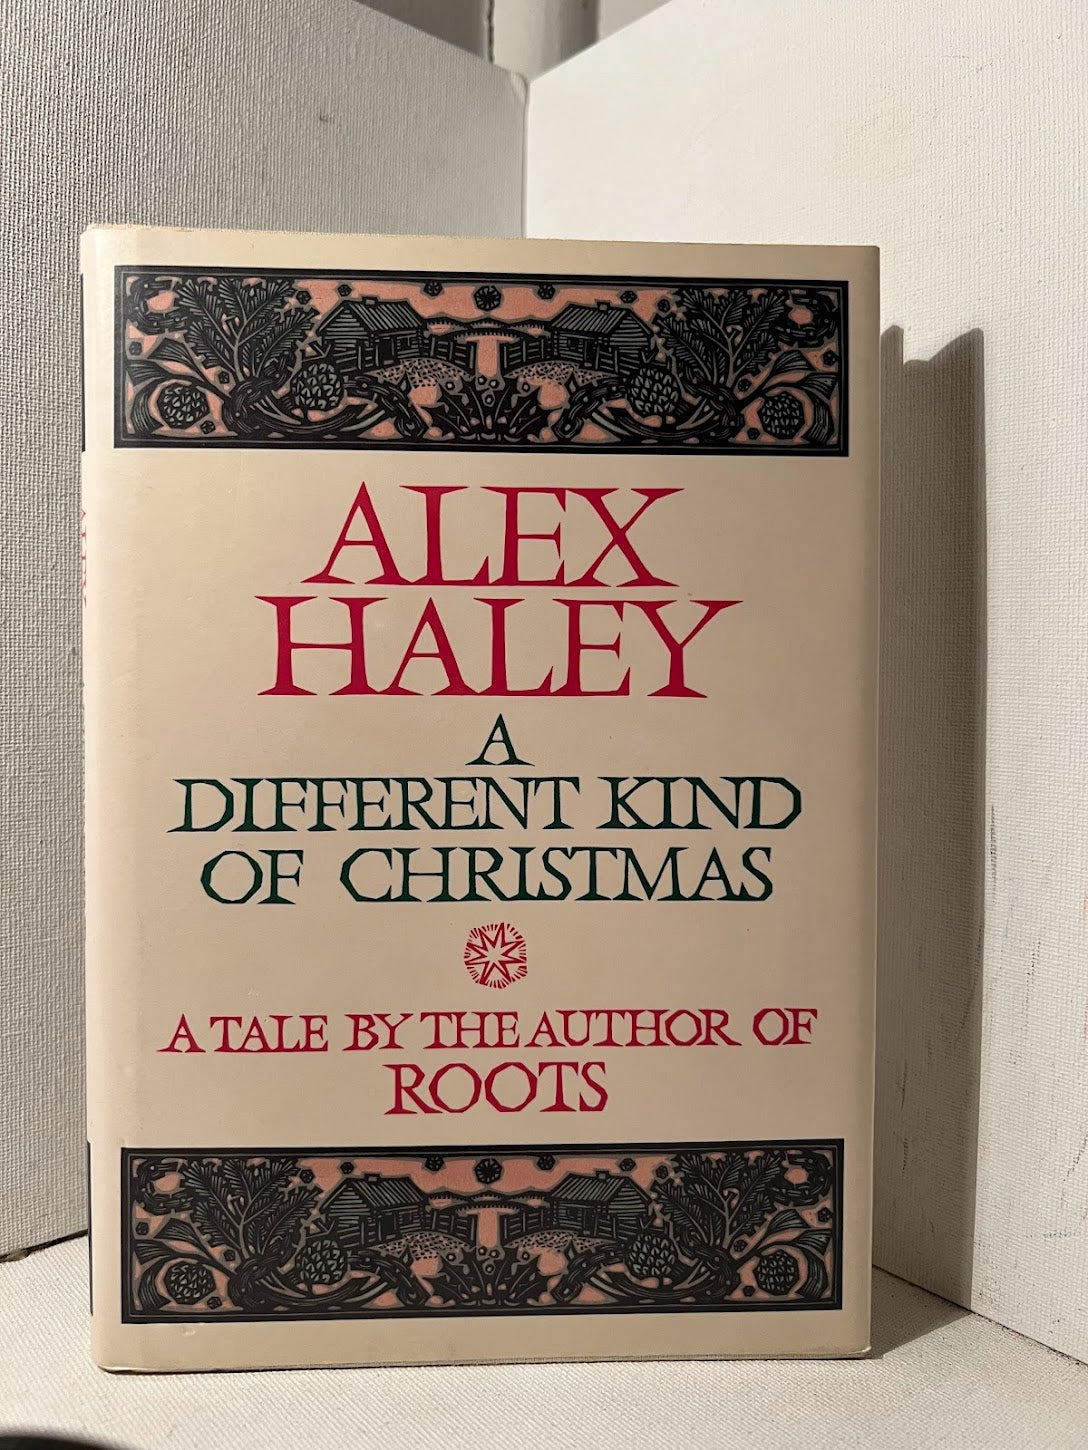 A Different Kind of Christmas by Alex Haley